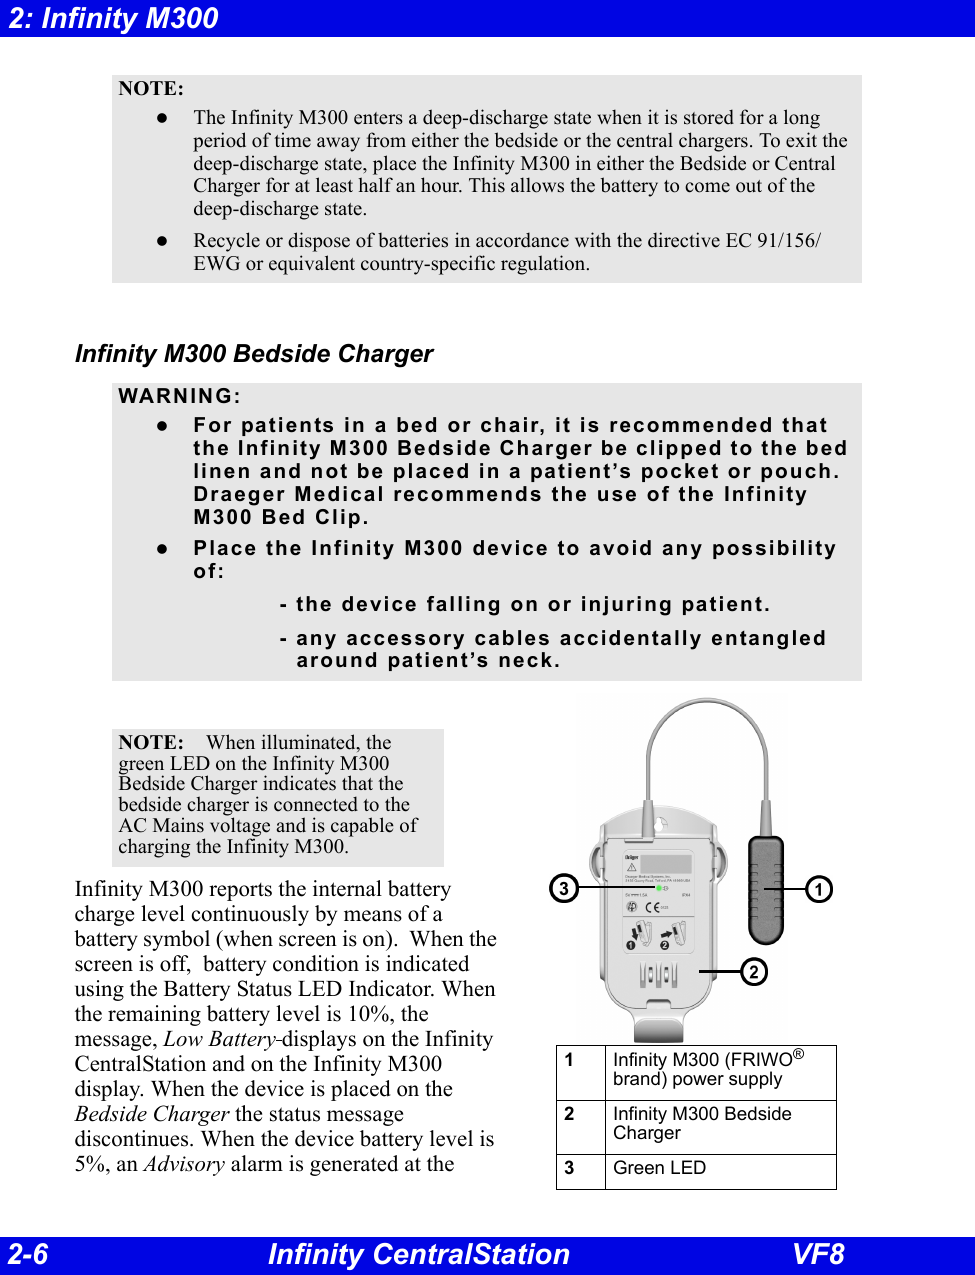 2-6 Infinity CentralStation VF82: Infinity M300Infinity M300 Bedside Charger   Infinity M300 reports the internal battery charge level continuously by means of a battery symbol (when screen is on).  When the screen is off,  battery condition is indicated using the Battery Status LED Indicator. When the remaining battery level is 10%, the message, Low Battery displays on the Infinity CentralStation and on the Infinity M300 display. When the device is placed on the Bedside Charger the status message discontinues. When the device battery level is 5%, an Advisory alarm is generated at the NOTE:zThe Infinity M300 enters a deep-discharge state when it is stored for a long period of time away from either the bedside or the central chargers. To exit the deep-discharge state, place the Infinity M300 in either the Bedside or Central Charger for at least half an hour. This allows the battery to come out of the deep-discharge state.zRecycle or dispose of batteries in accordance with the directive EC 91/156/EWG or equivalent country-specific regulation.WARNING:zFor patients in a bed or chair, it is recommended that the Infinity M300 Bedside Charger be clipped to the bed linen and not be placed in a patient’s pocket or pouch.  Draeger Medical recommends the use of the Infinity M300 Bed Clip.zPlace the Infinity M300 device to avoid any possibility of: - the device falling on or injuring patient.- any accessory cables accidentally entangled around patient’s neck.NOTE: When illuminated, the green LED on the Infinity M300 Bedside Charger indicates that the bedside charger is connected to the AC Mains voltage and is capable of charging the Infinity M300.3-le1Infinity M300 (FRIWO® brand) power supply2Infinity M300 Bedside Charger3Green LED